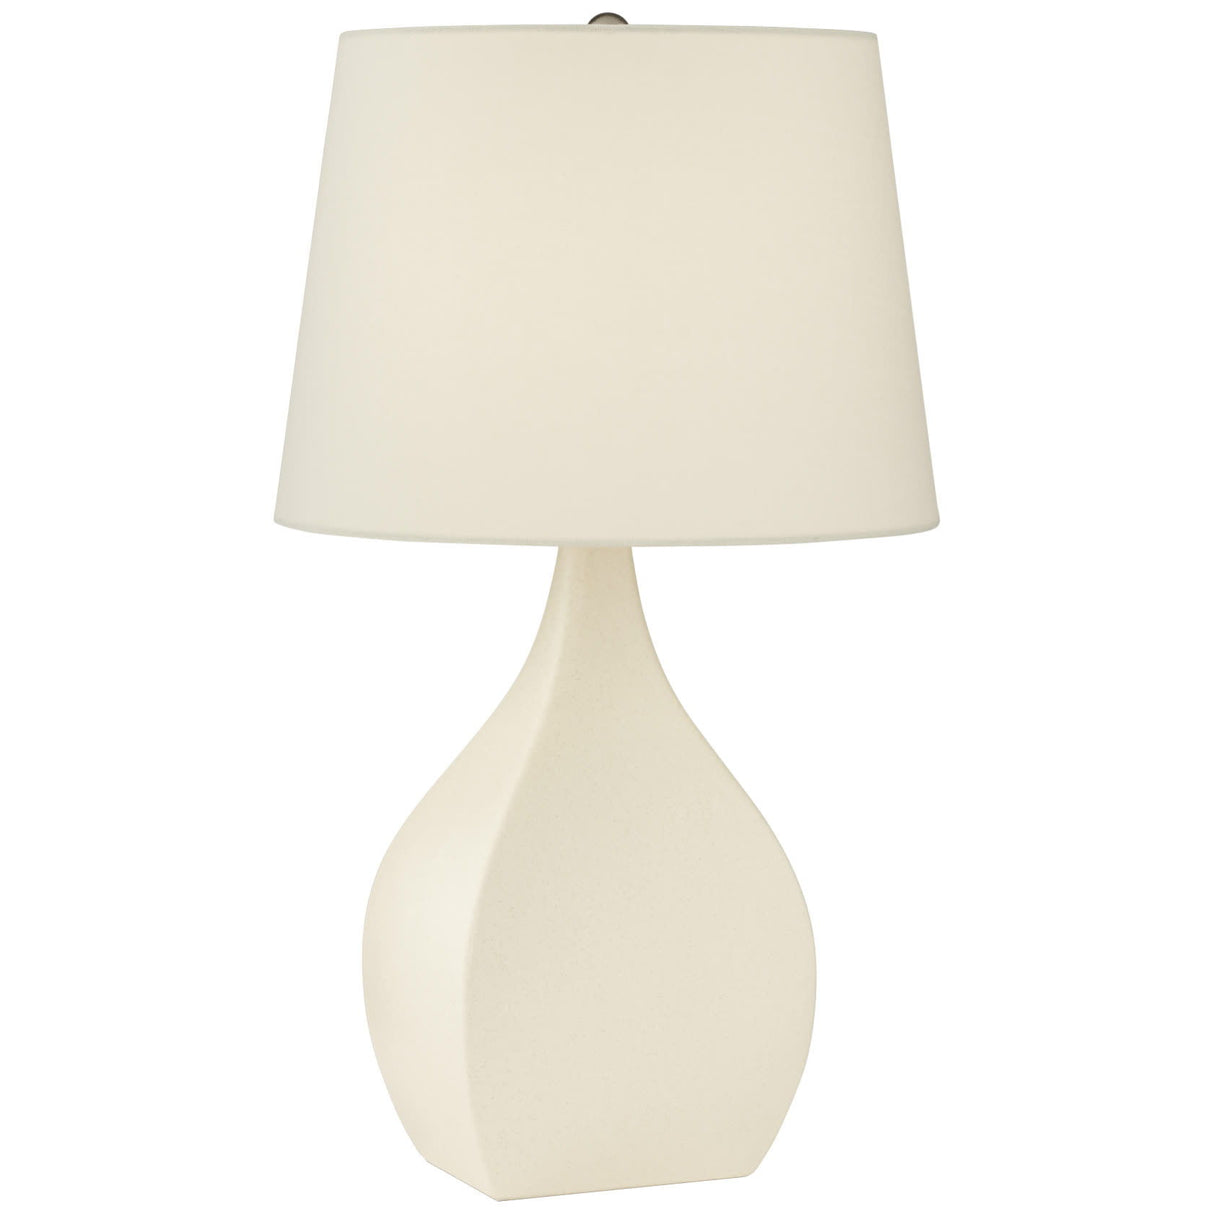 Addy - Table Lamp - Off-White Linen